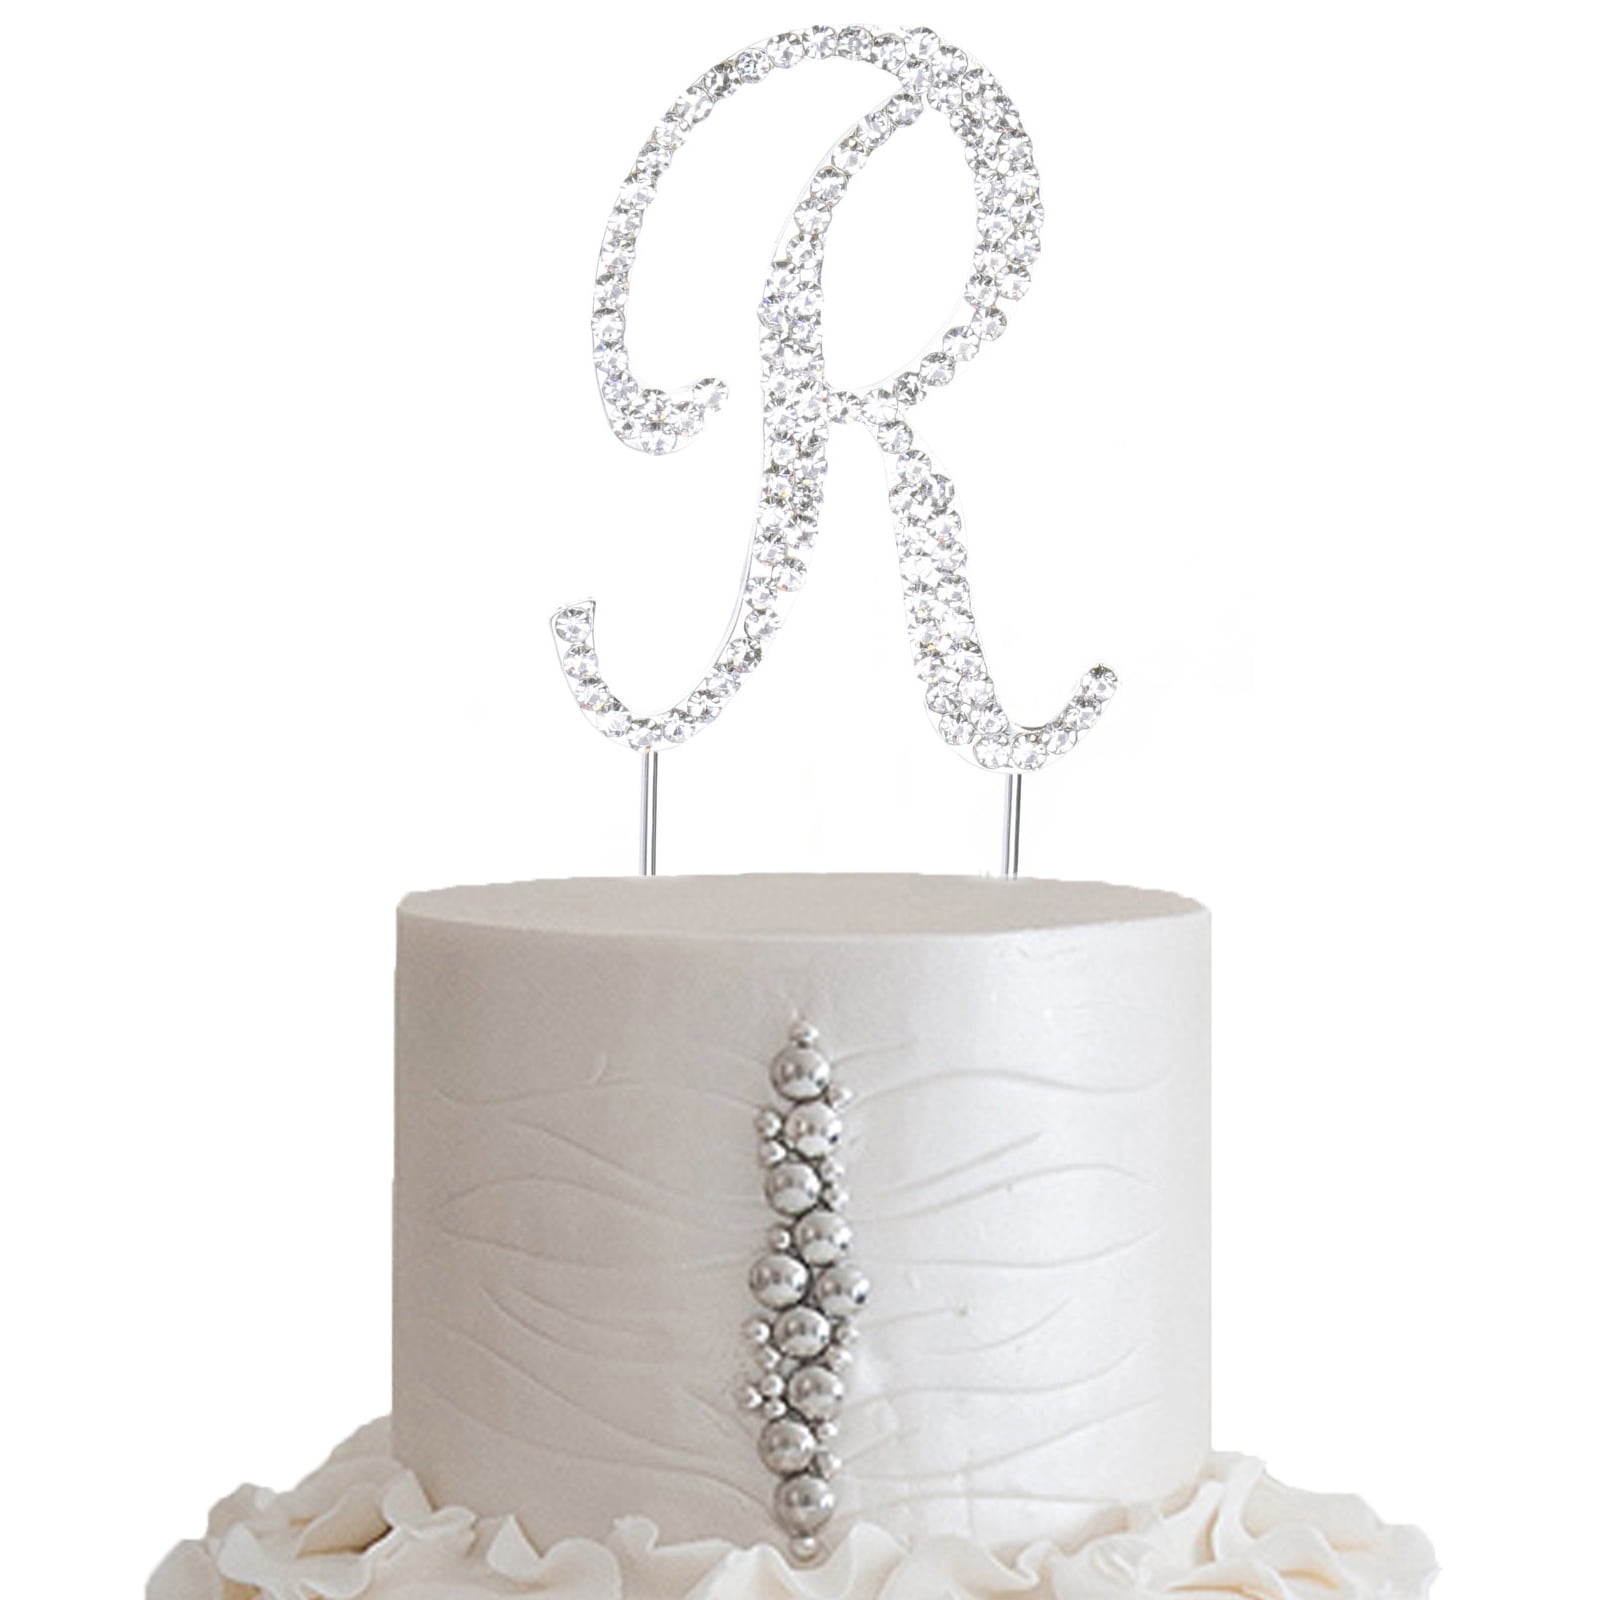 4.5" Tall Letter Y Bling Rhinestone  Wedding Party Cake Topper 